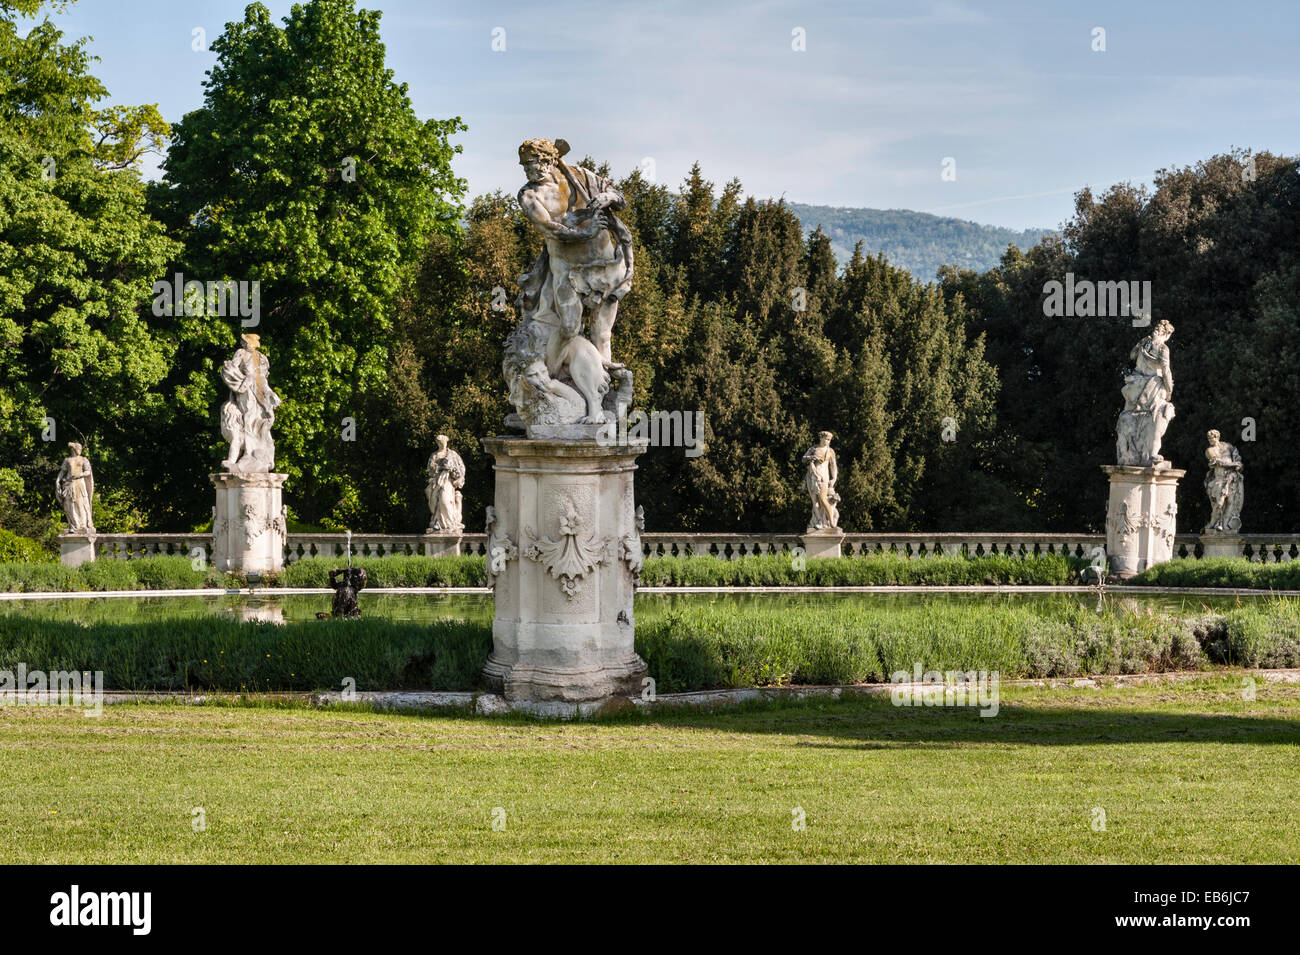 The romantic gardens of the early 18c Villa Trissino Marzotto, Vicenza, Italy. The pool in the lower garden, surrounded by statues by Orazio Marinali Stock Photo